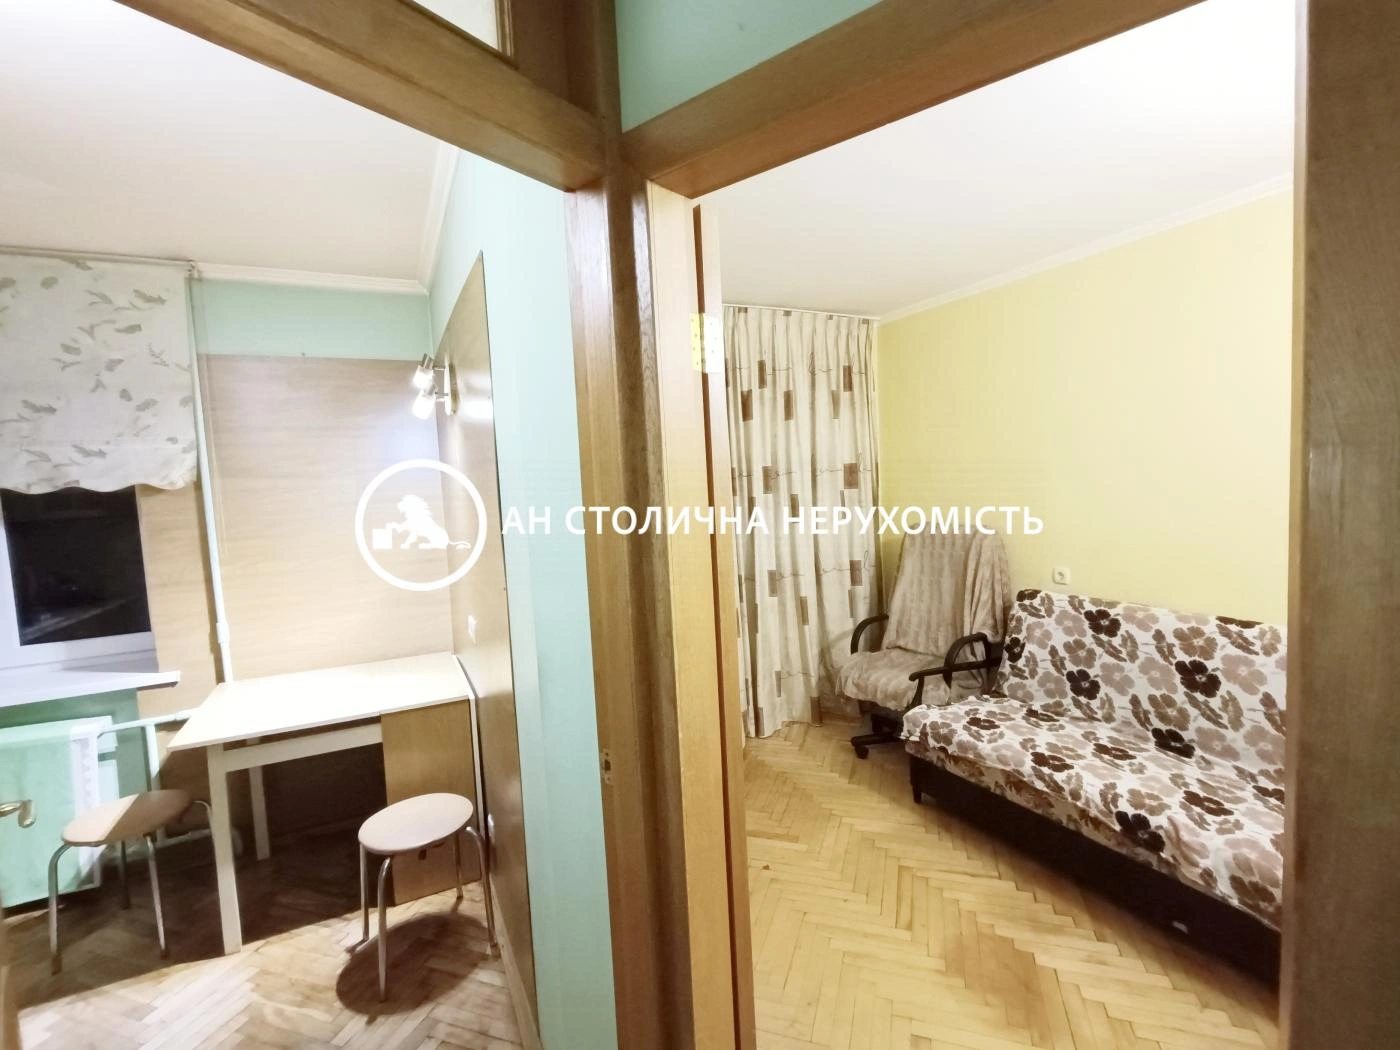 Apartment for rent. 2 rooms, 50 m², 4th floor/9 floors. Saperne Pole, Kyiv. 